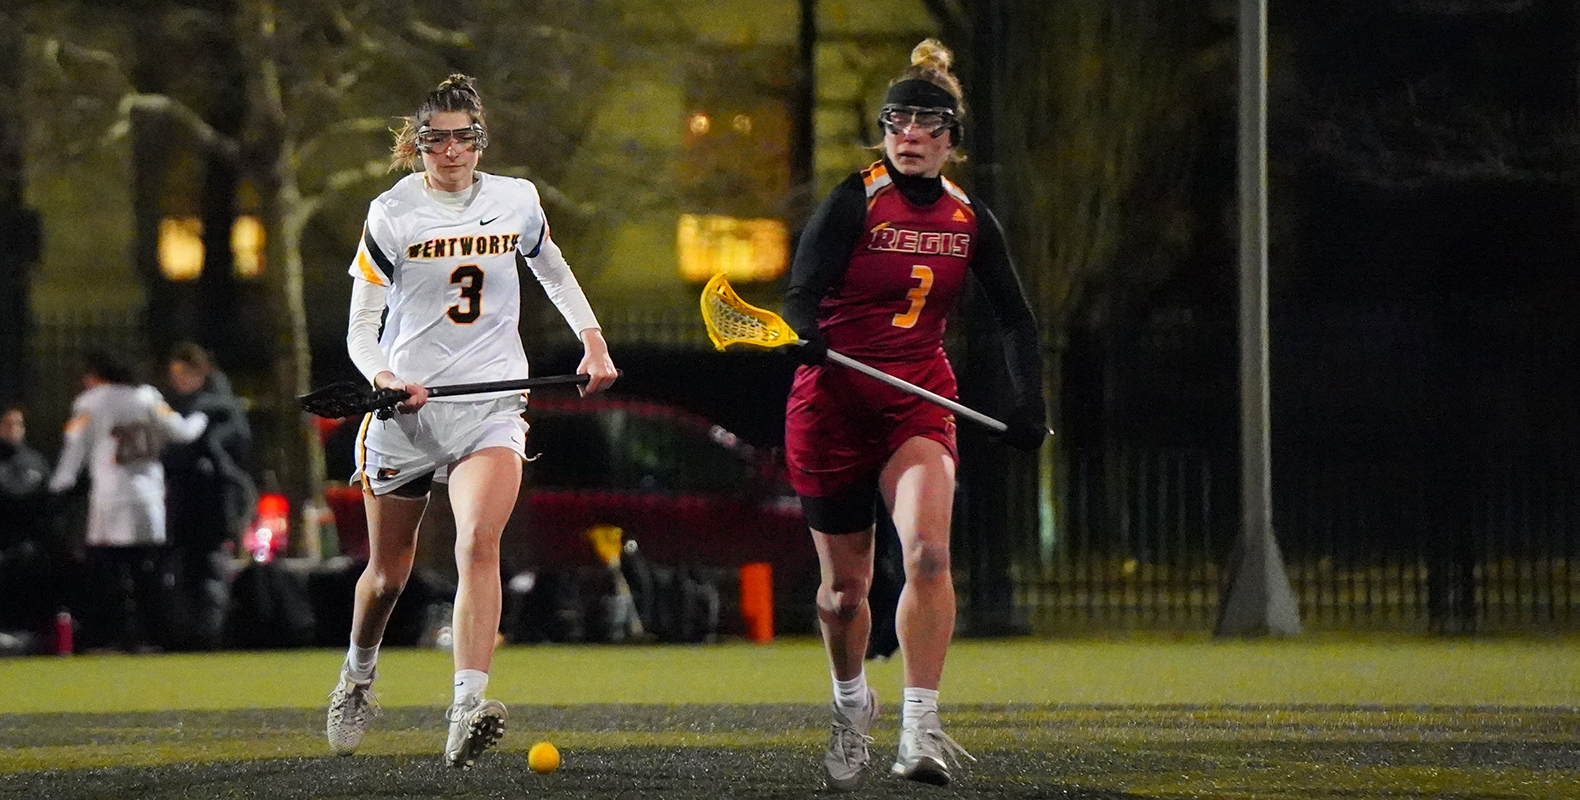 Women’s Lacrosse Earns Come-From-Behind Road Victory